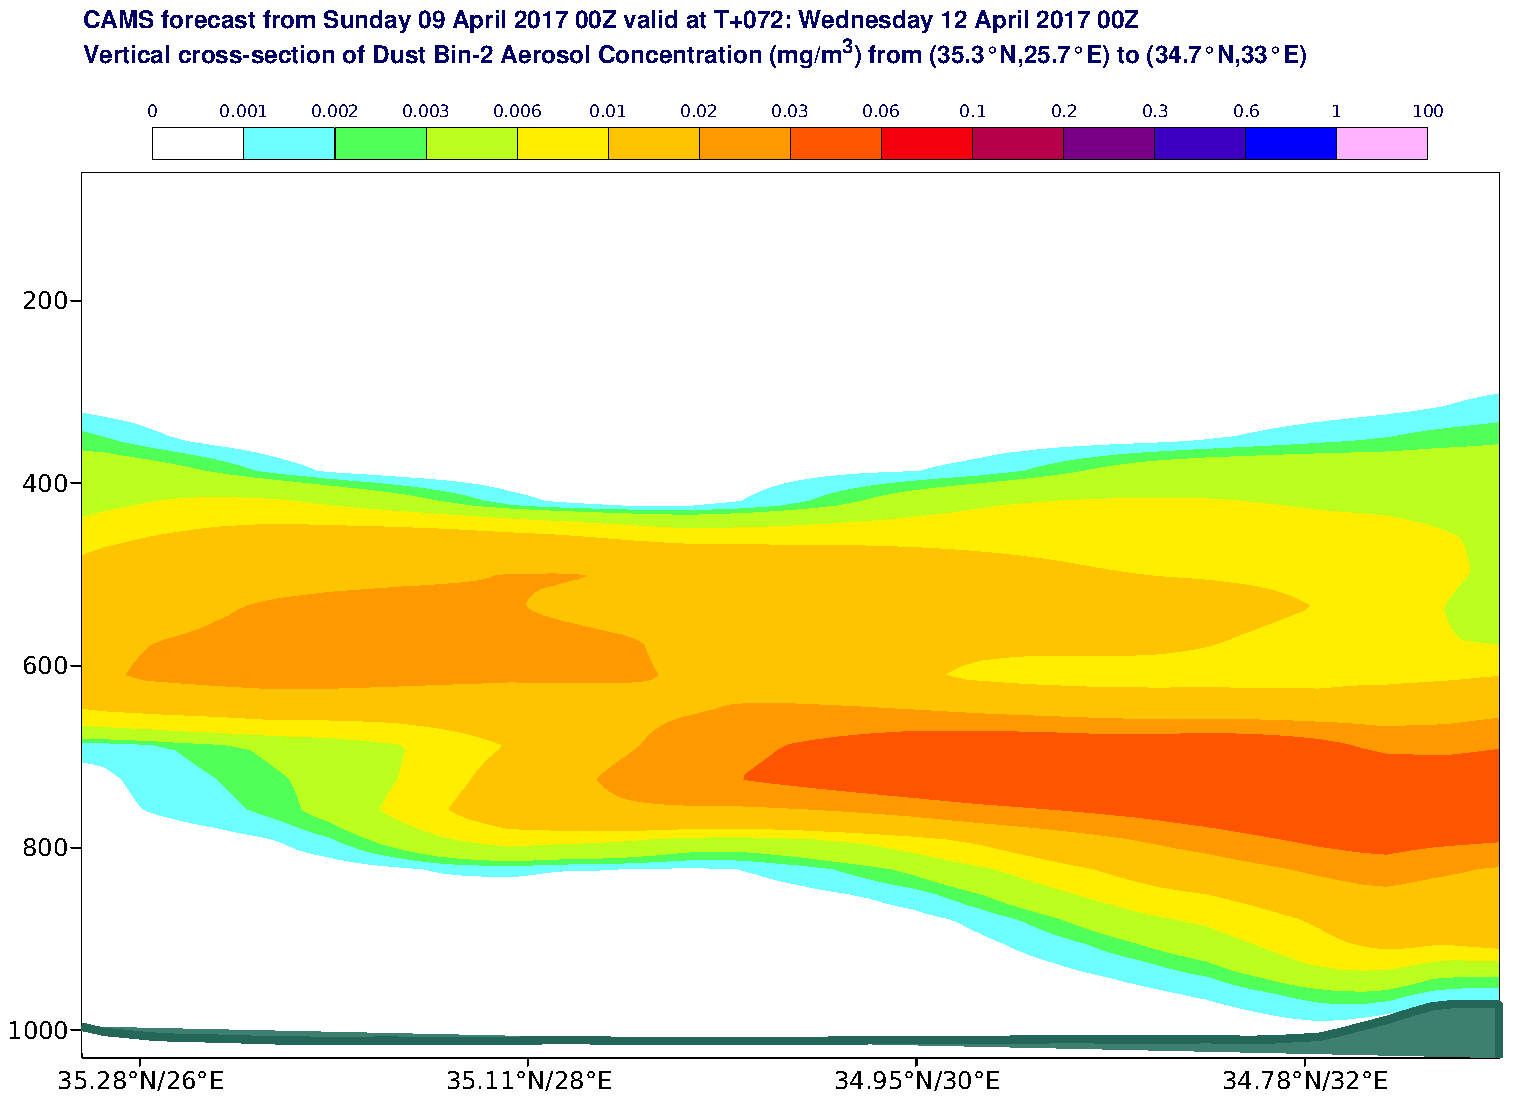 Vertical cross-section of Dust Bin-2 Aerosol Concentration (mg/m3) valid at T72 - 2017-04-12 00:00